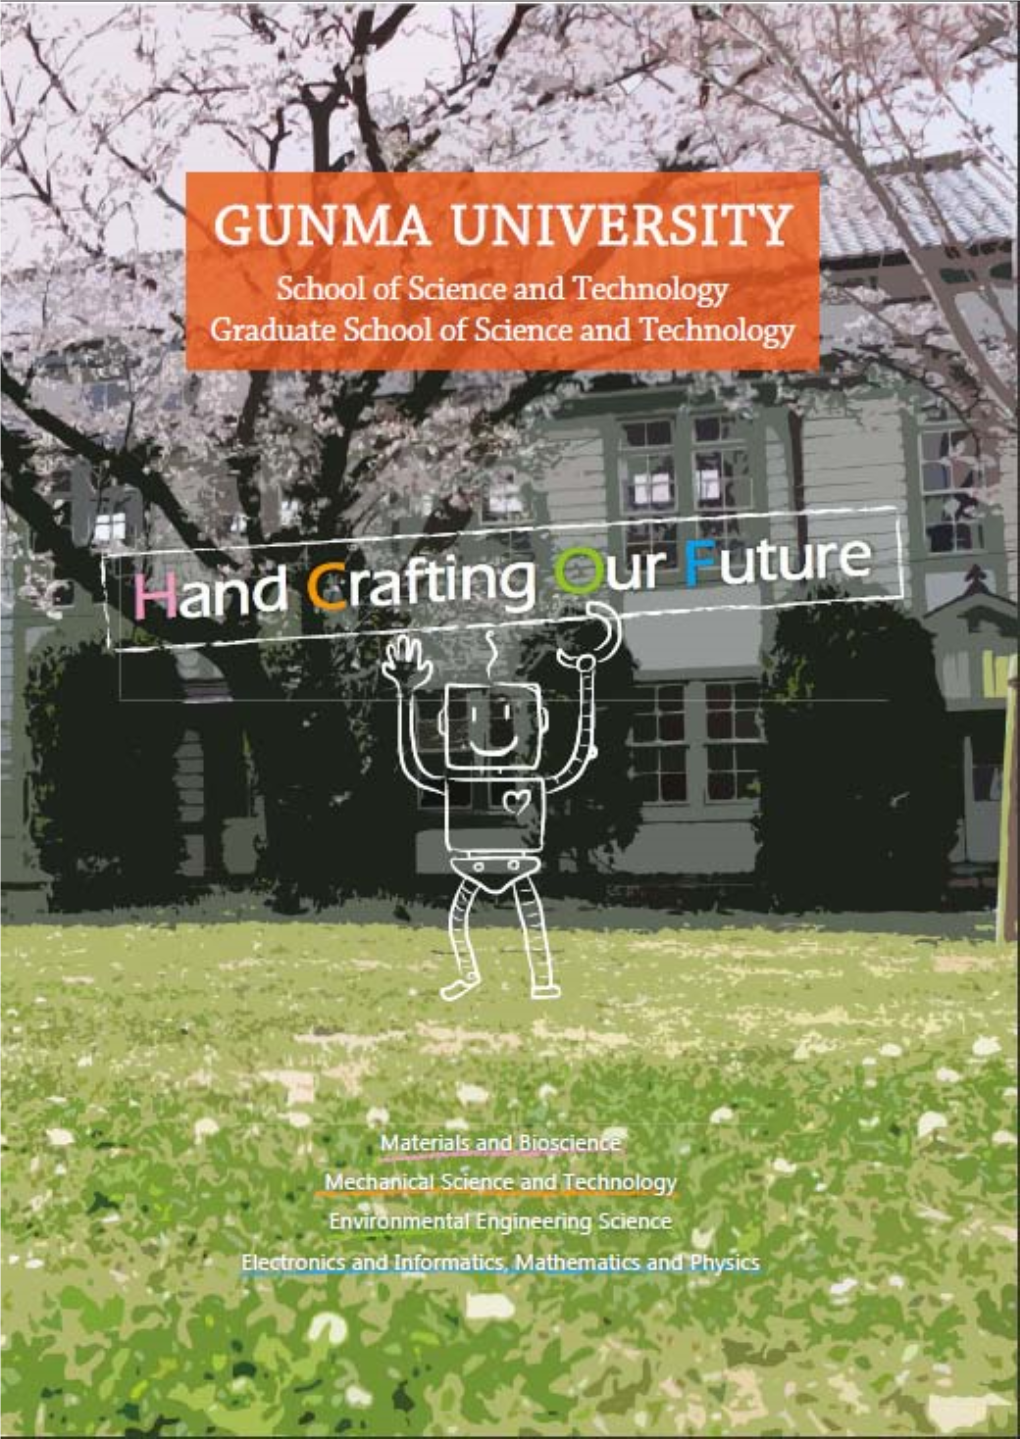 Welcome to Gunma University School of Science and Technology!